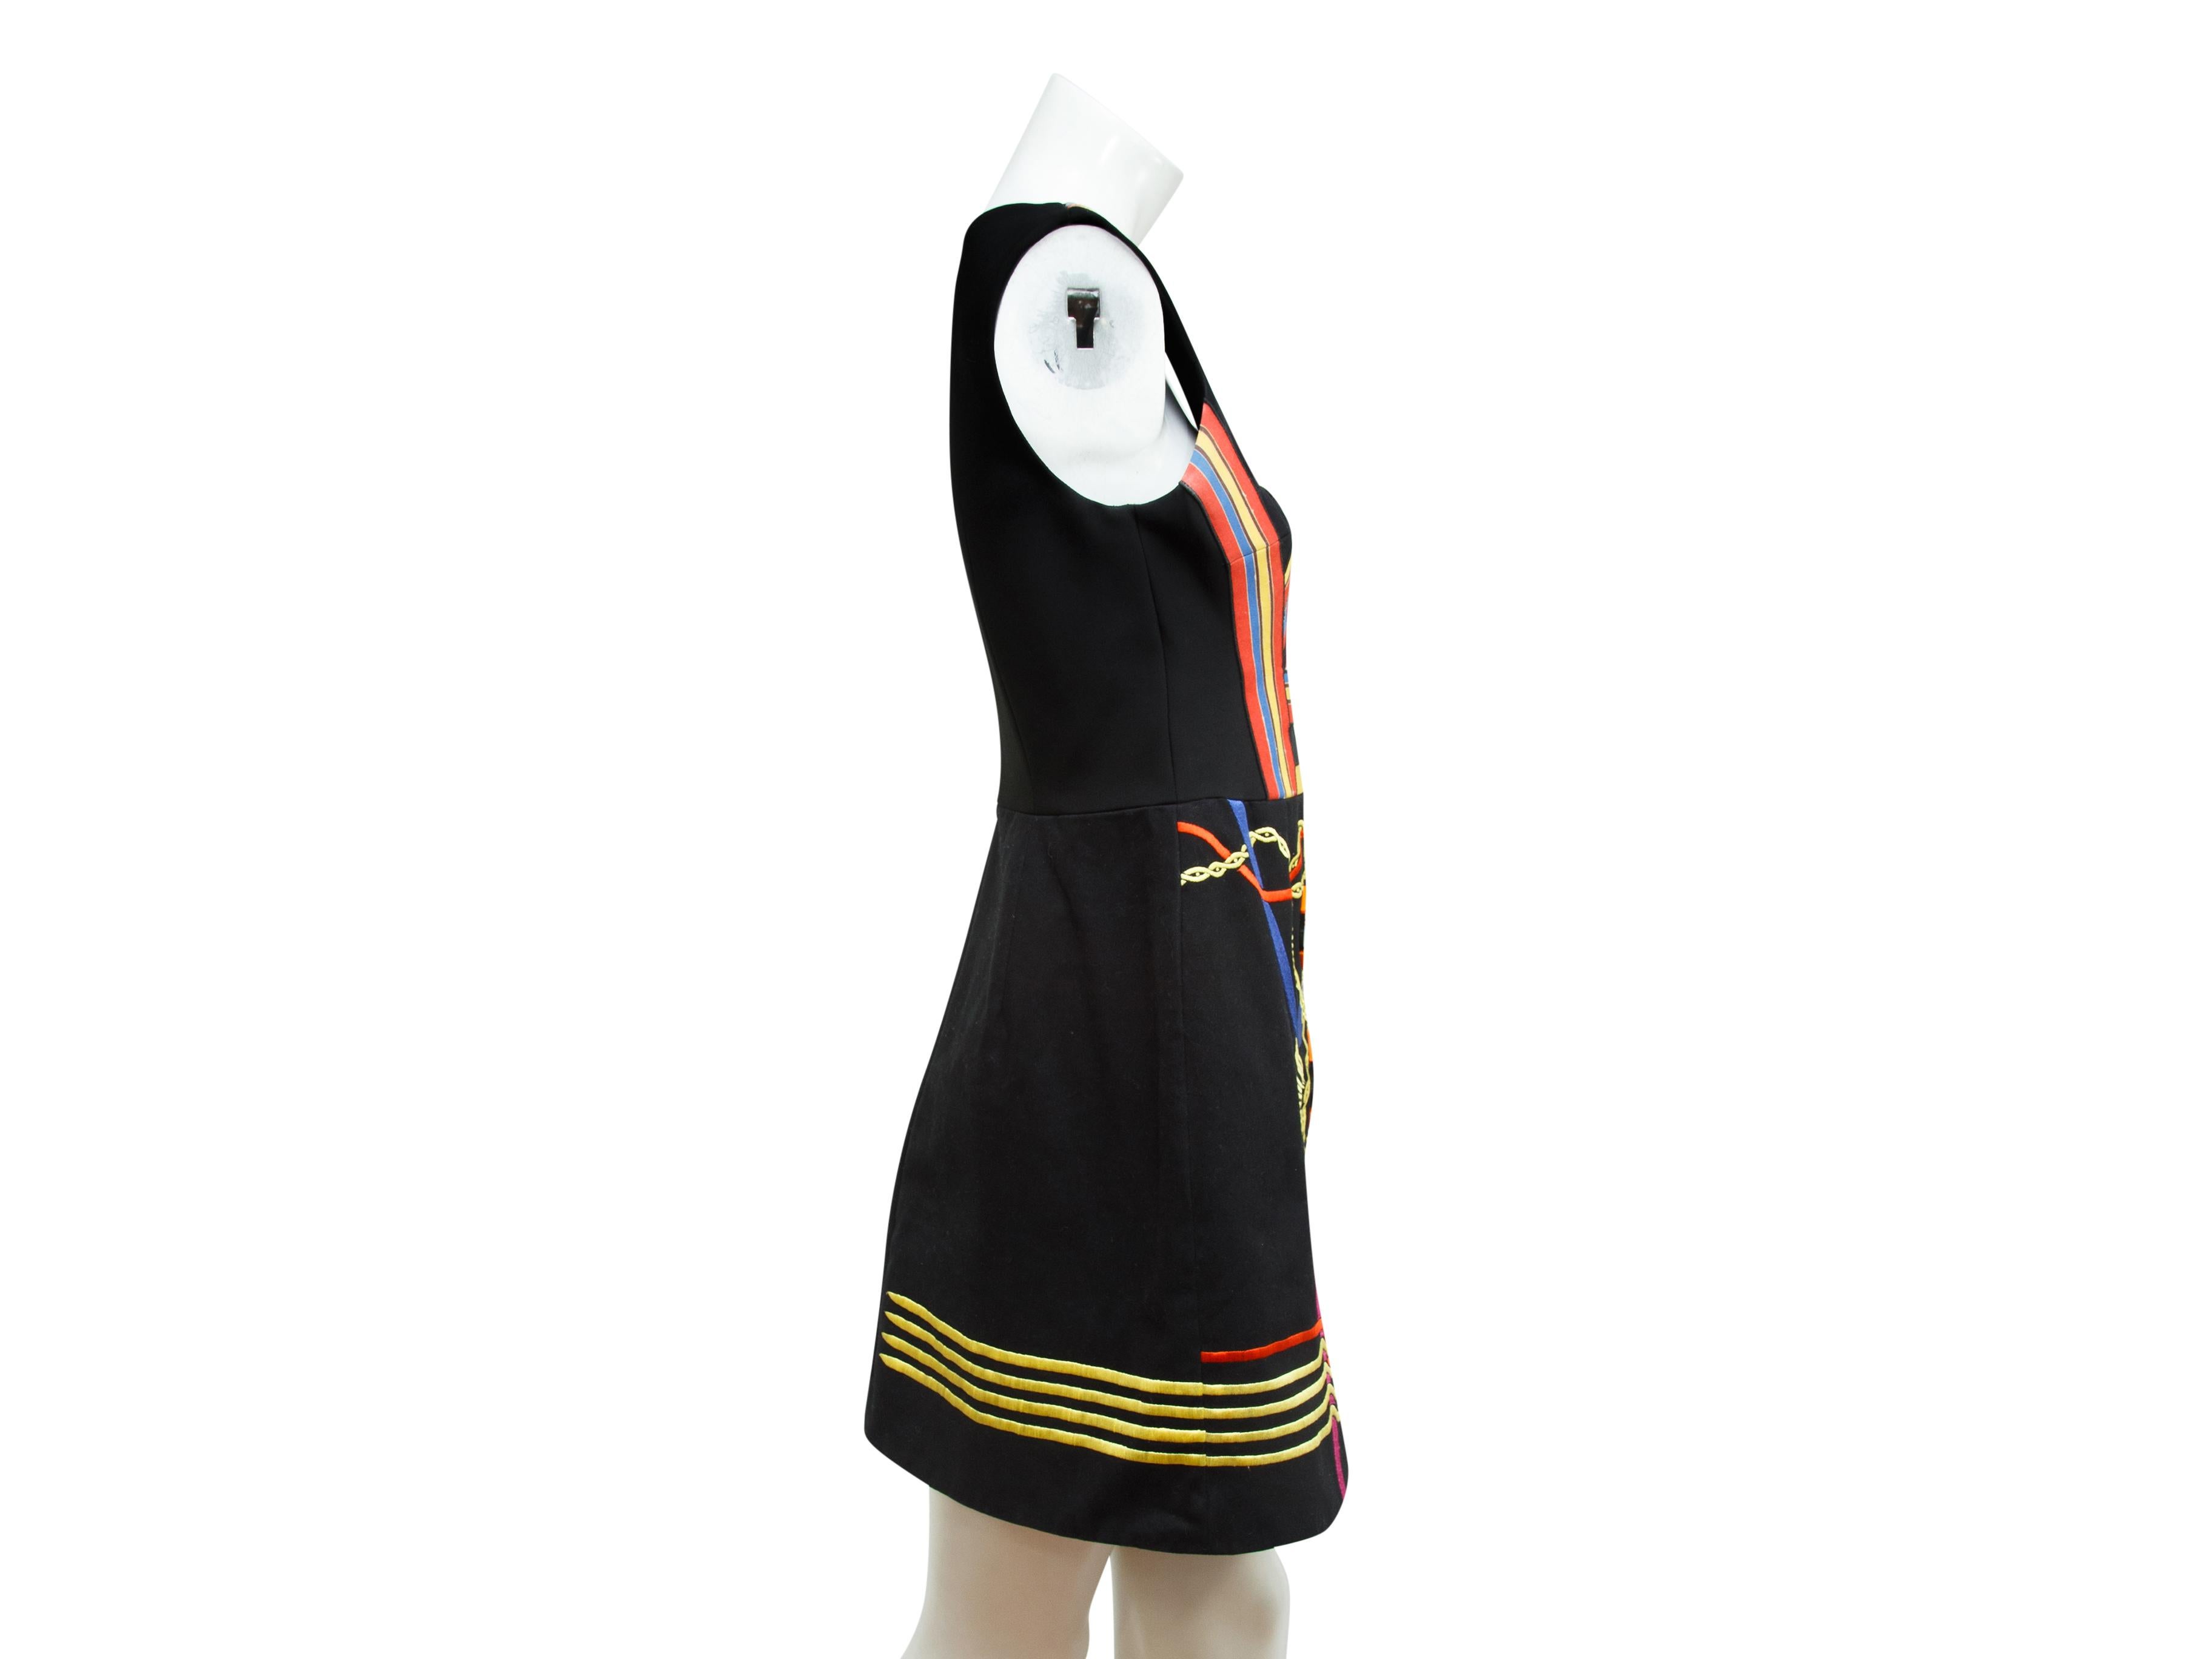 Product details:  Multicolor embroidered fit-and-flare dress by Peter Pilotto.  V-neck.  Sleeveless.  Concealed back zip closure.  32